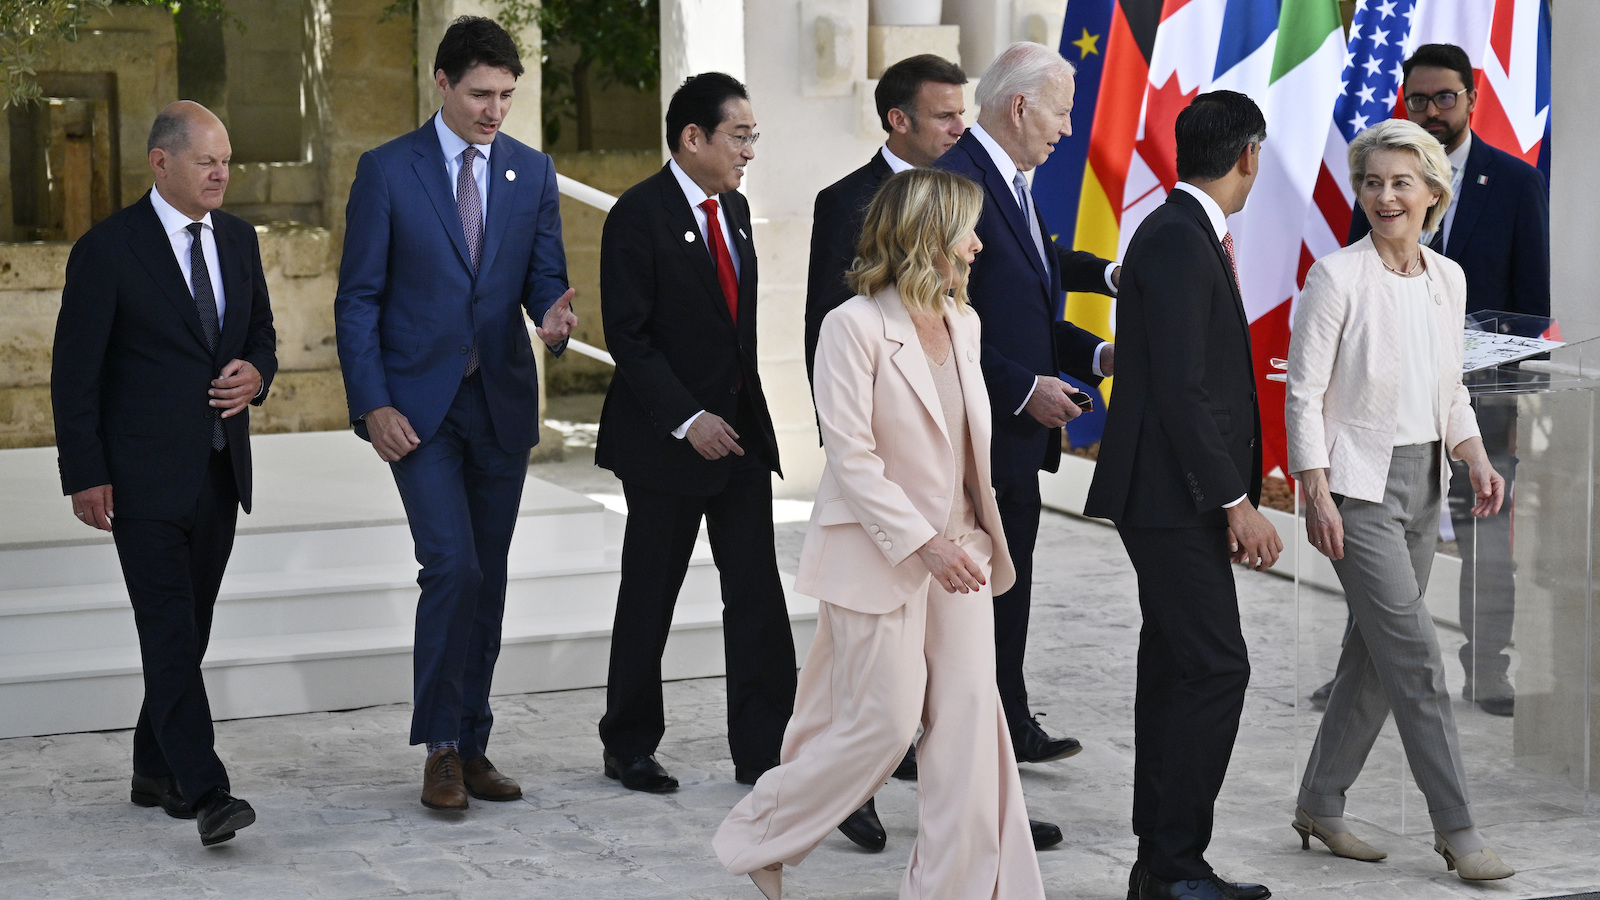 Seven men in suits and two women in pantsuits walk in the same direction across some gray cobblestones with seven world flags behind them